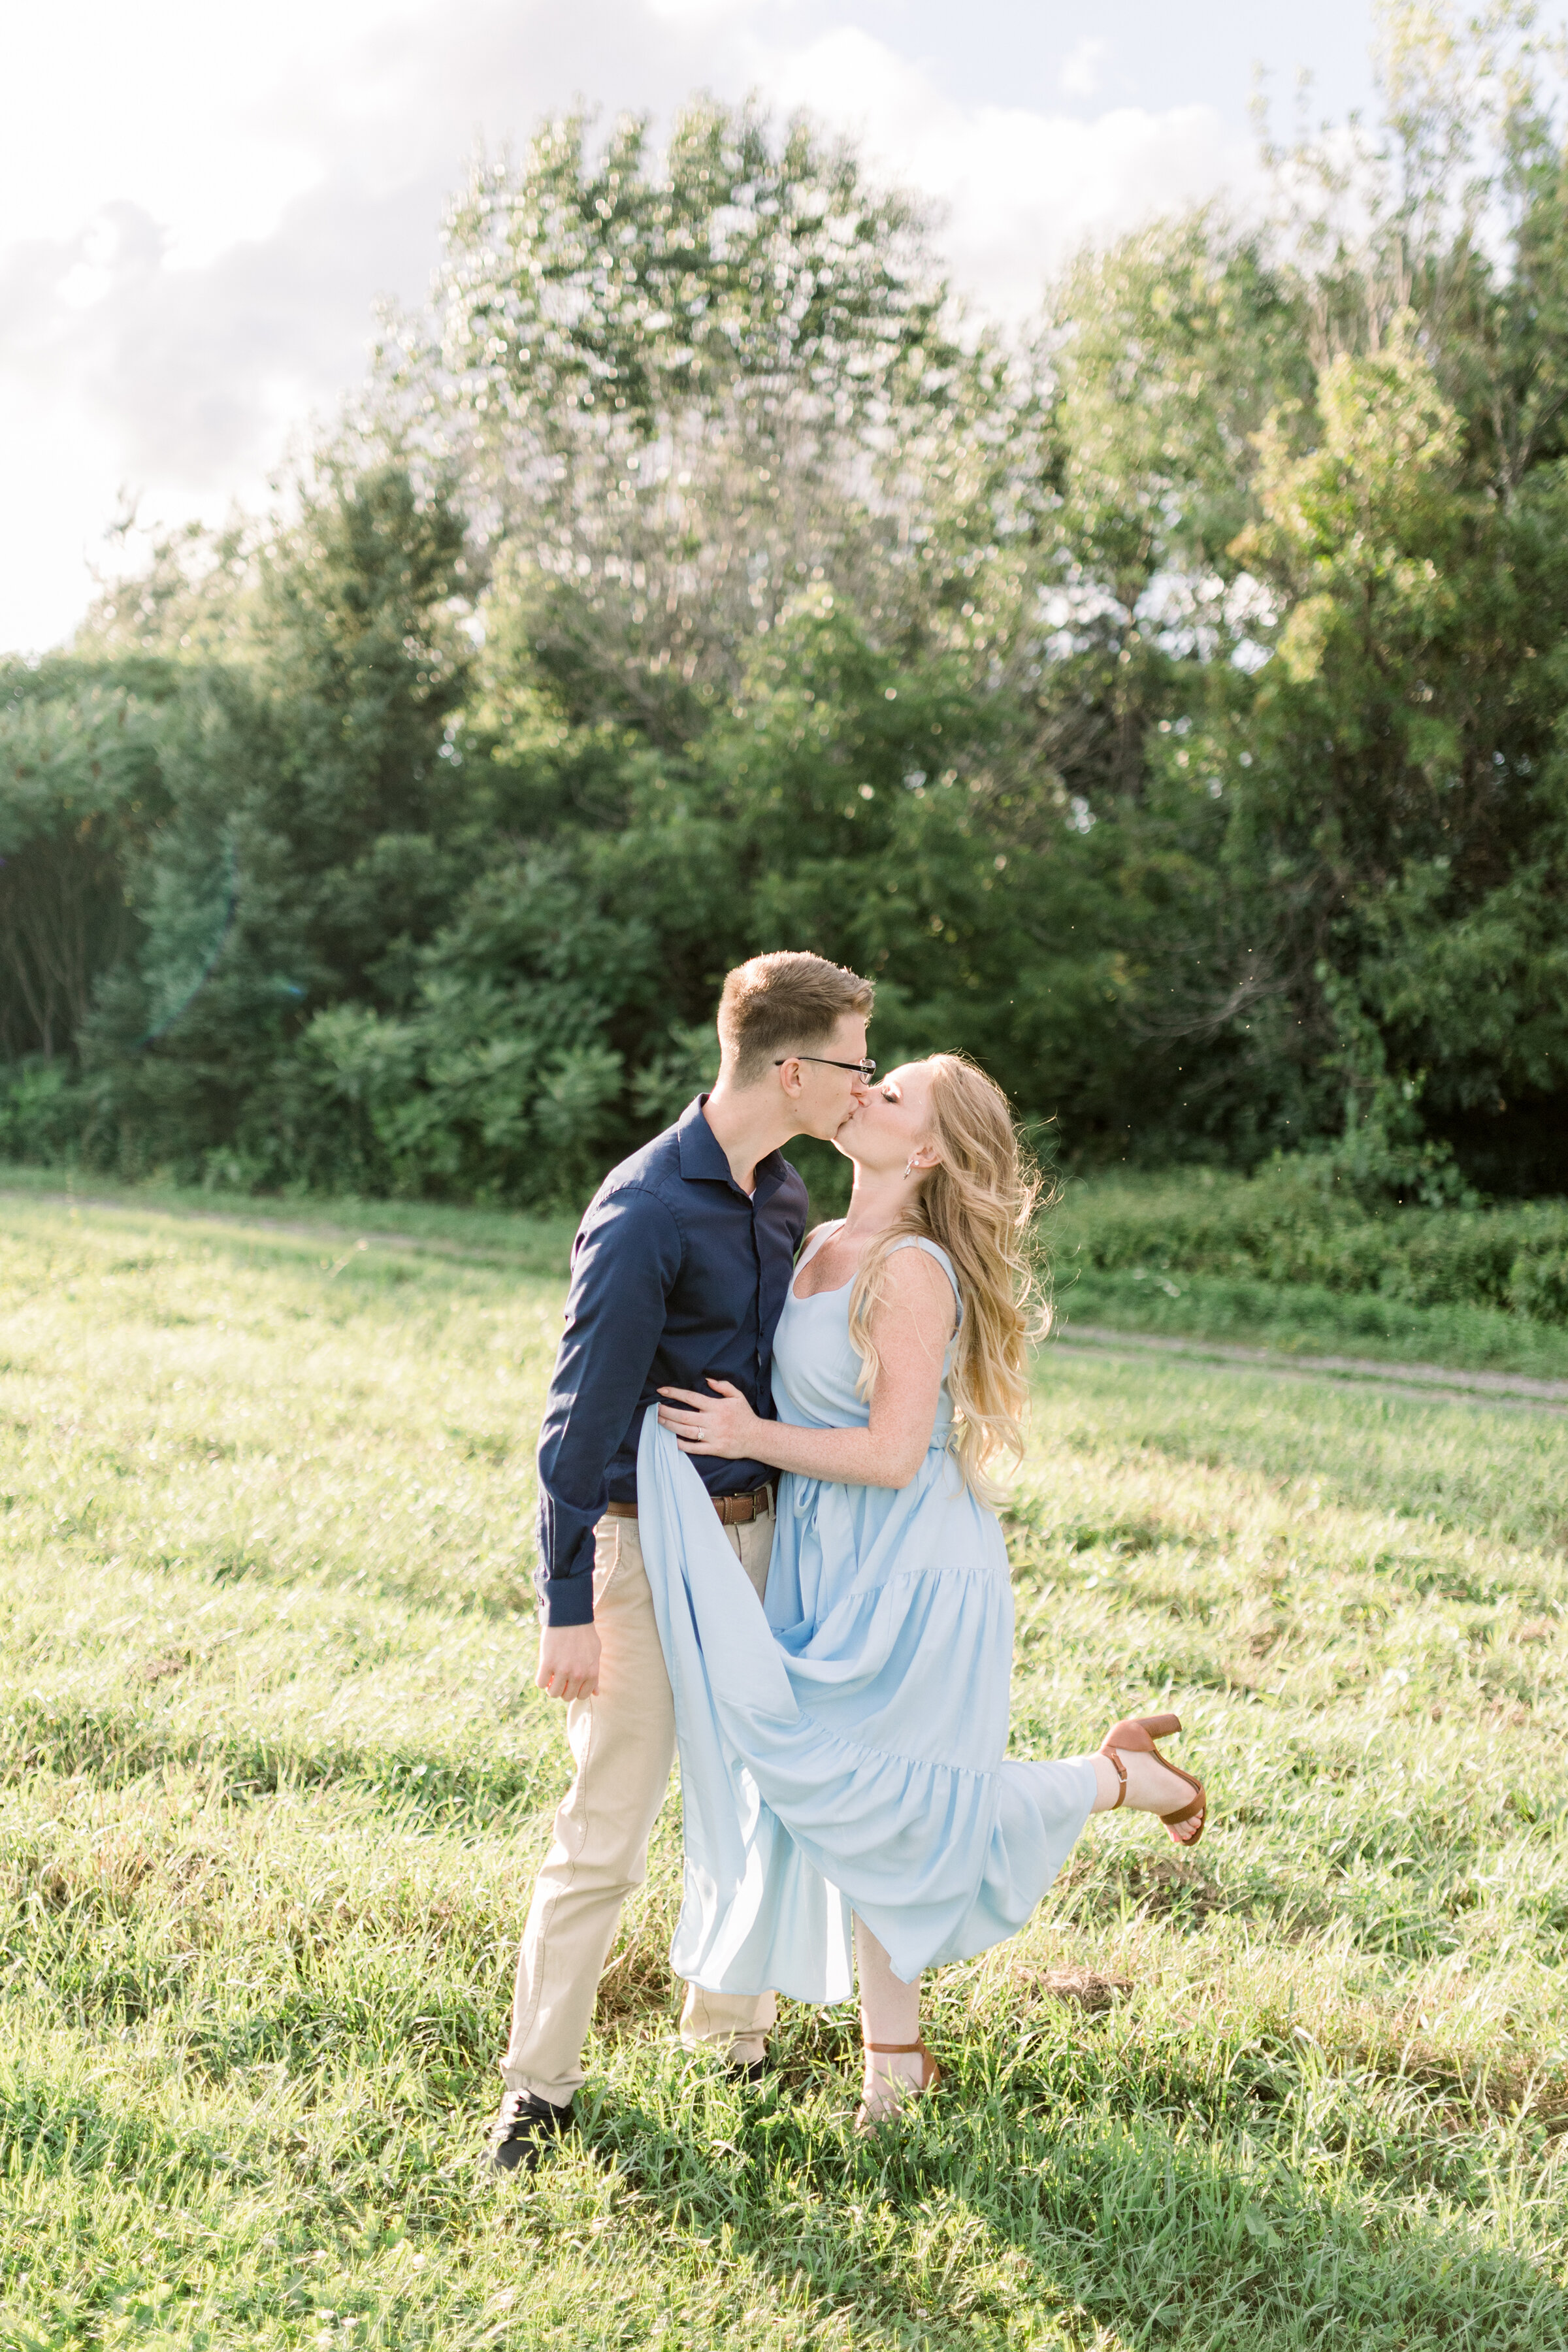  A beautiful couple kiss on a grassy hill in Dominion Arboretum, Ottawa in an engagement styled photo shoot by professional photographer Chelsea Mason Photography. Summer goals engagement location inspiration ideas and goals couple goals Ottawa engag